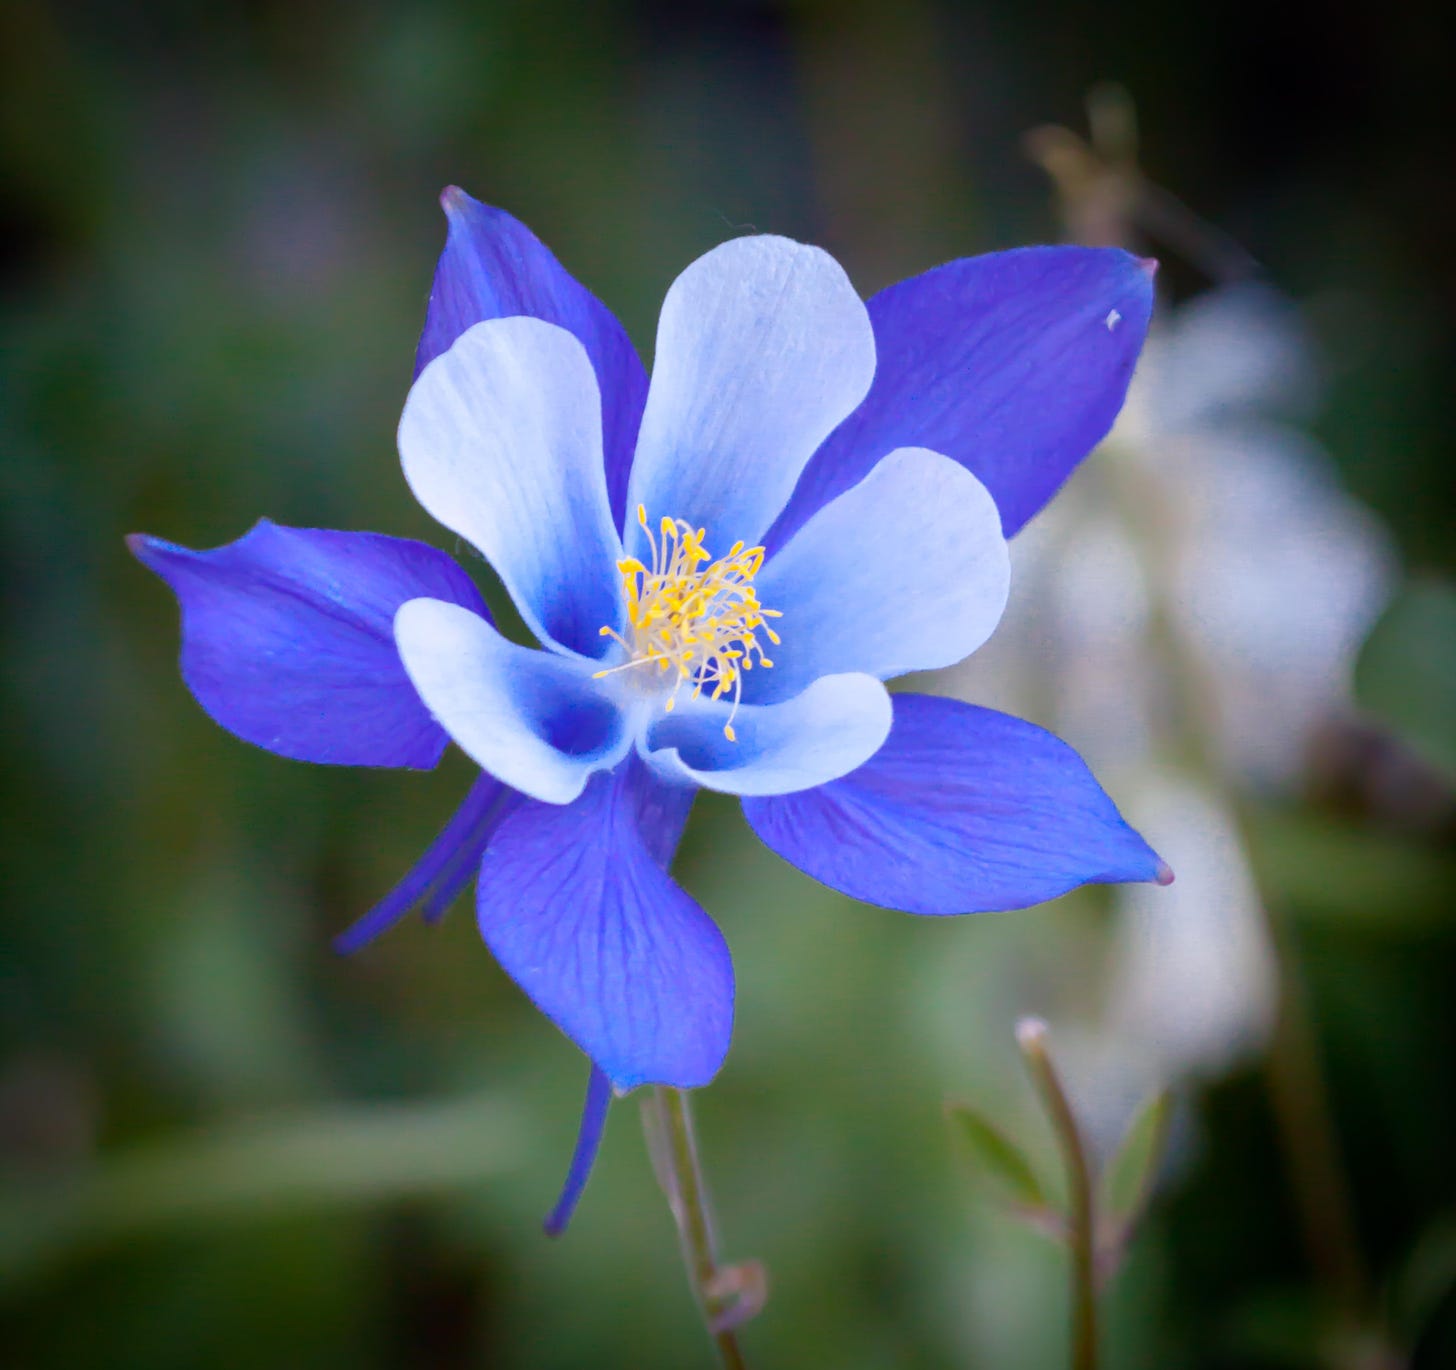 a purple columbine is pictured in full bloom. the flower has five lighter lilac petals with indigo divots near its center (filled with yellow pollen antennae). there are five dark purple outer petals framing the flower. 